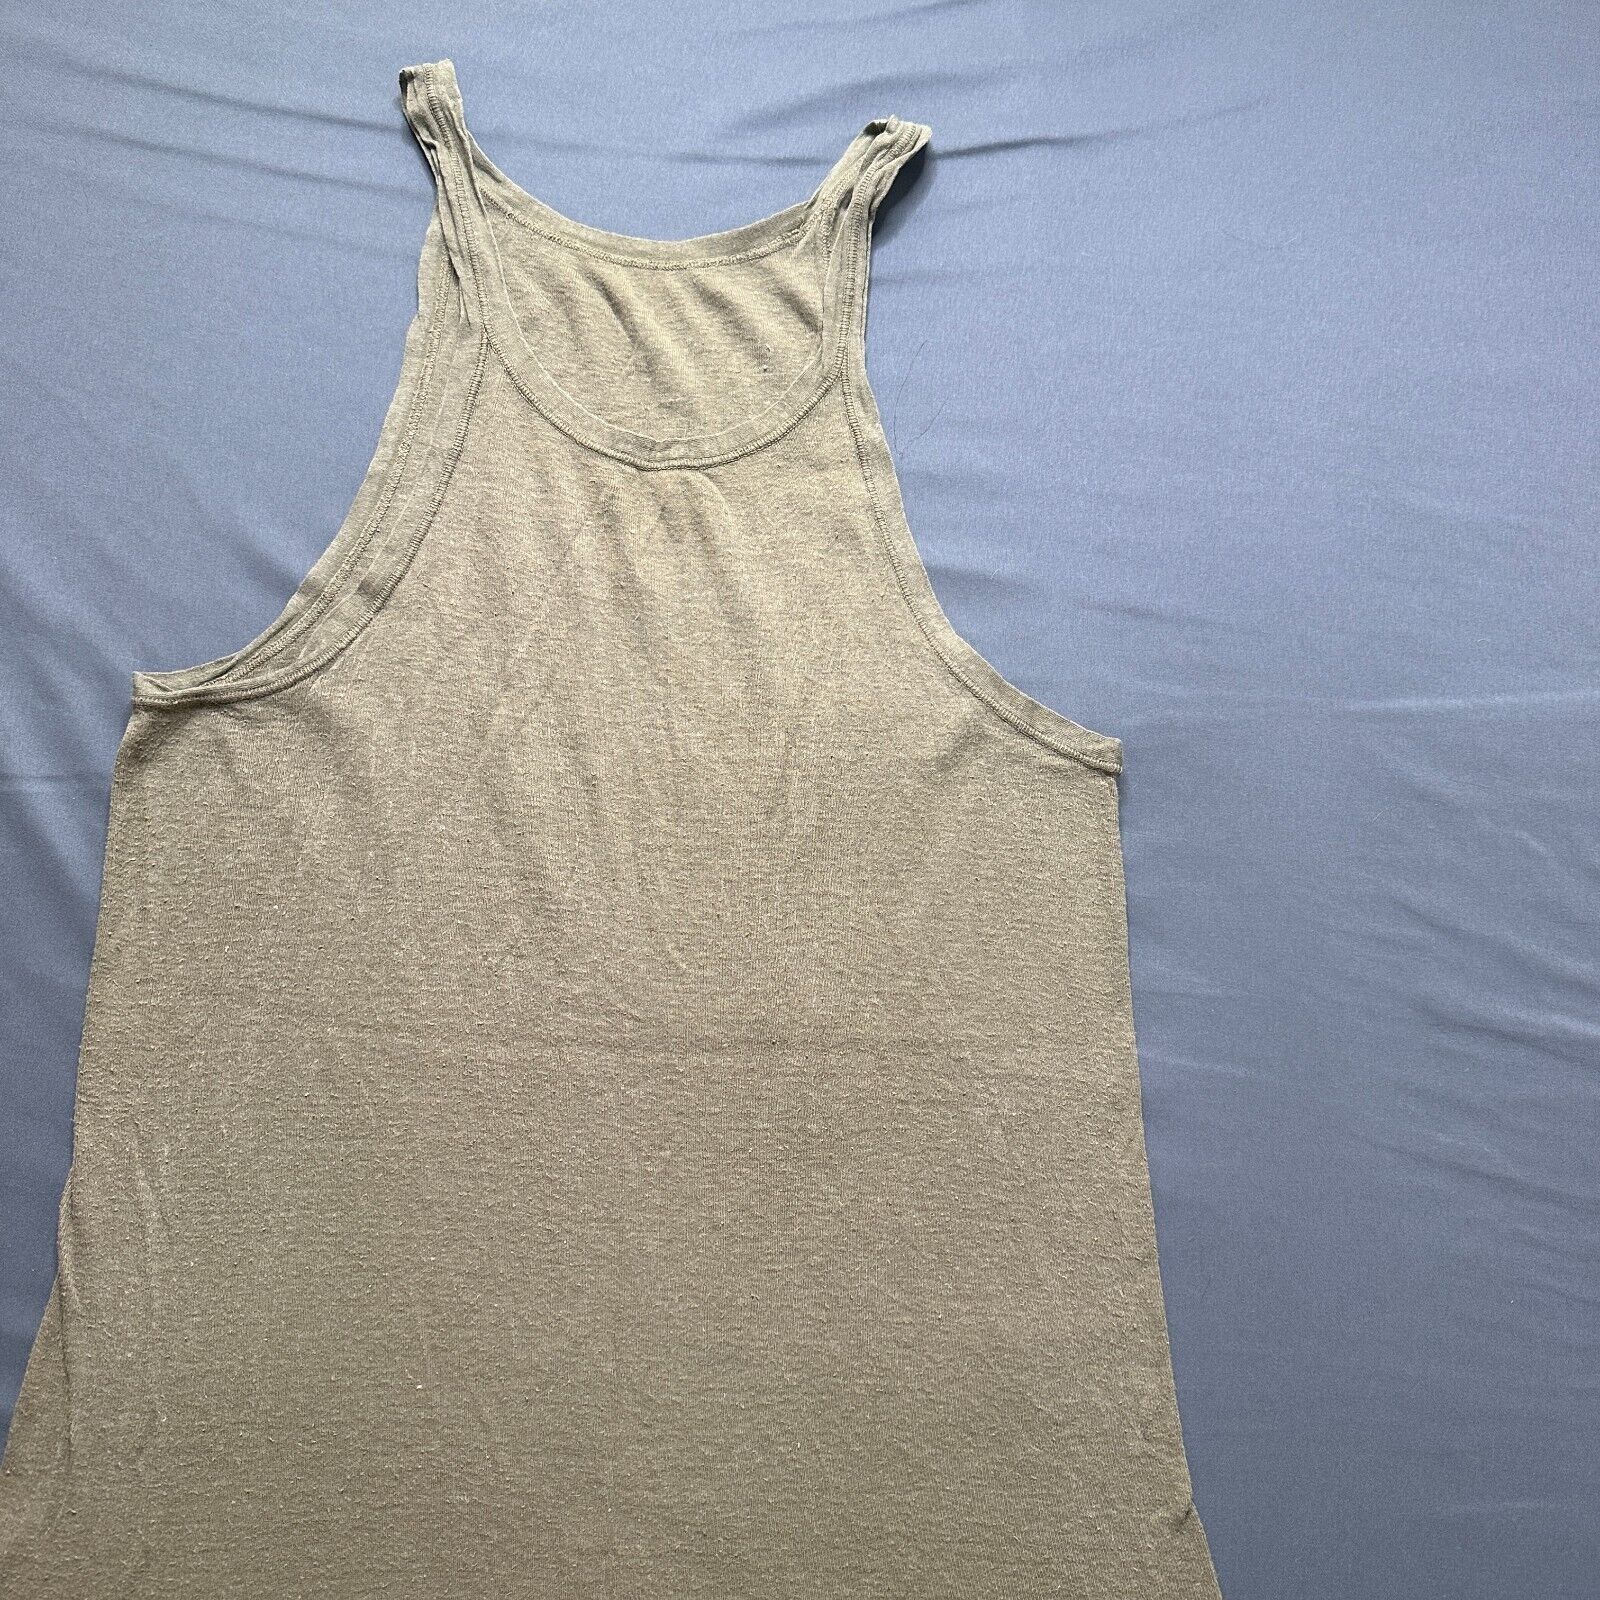 Vintage WW2 US Army Tank Top Mens M/L Olive Green Drab OG Cotton World War Two